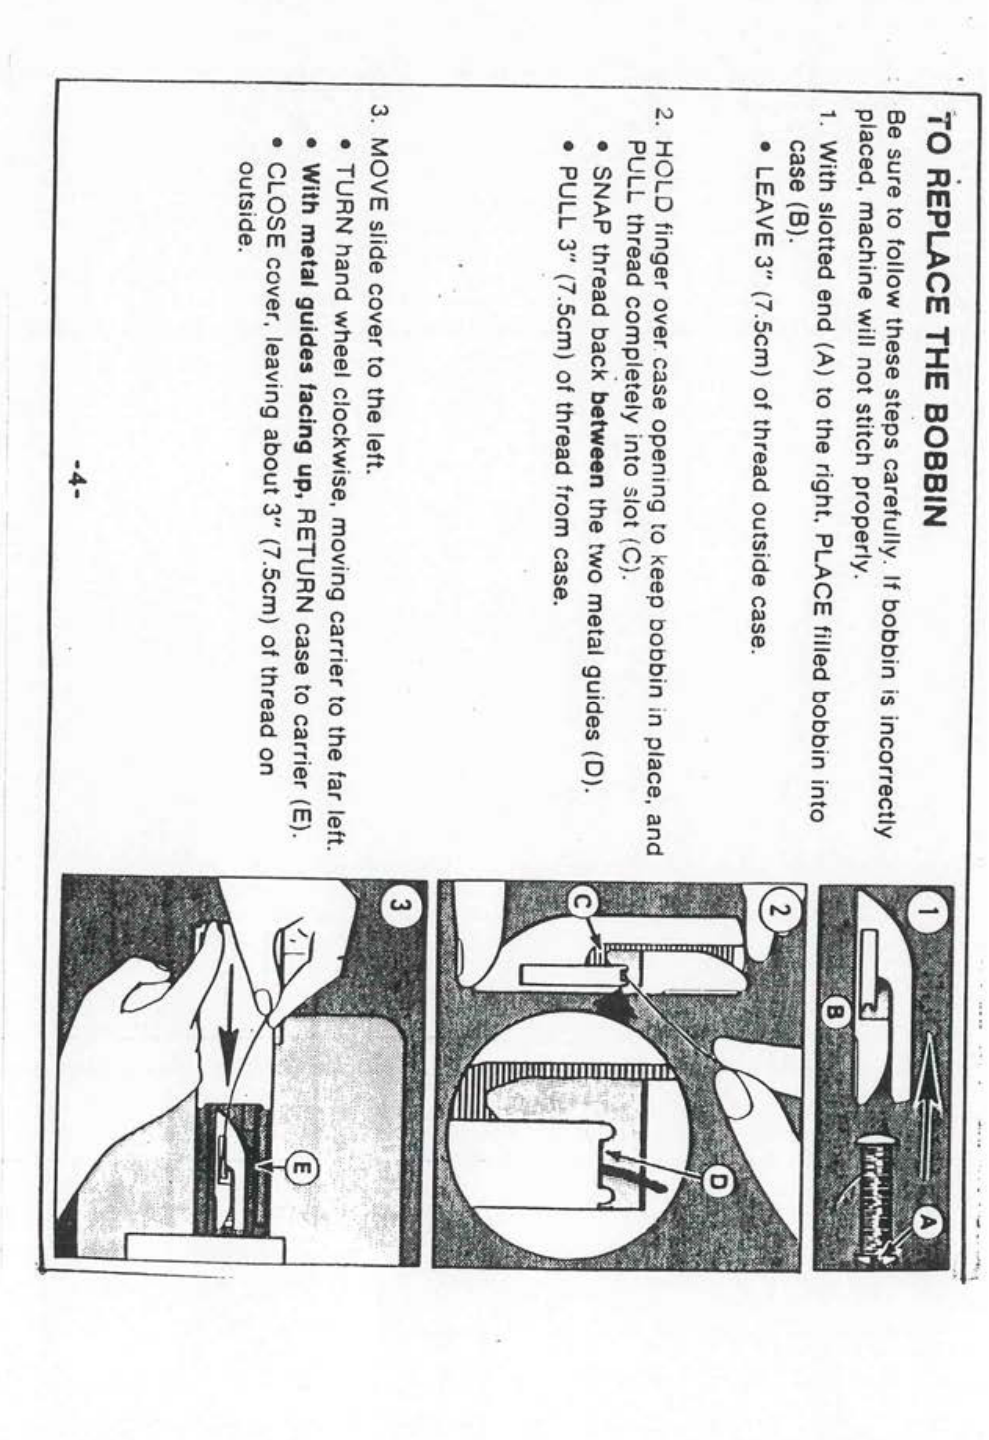 Manual Singer M100A Tiny Tailor (page 5 of 8) (English)